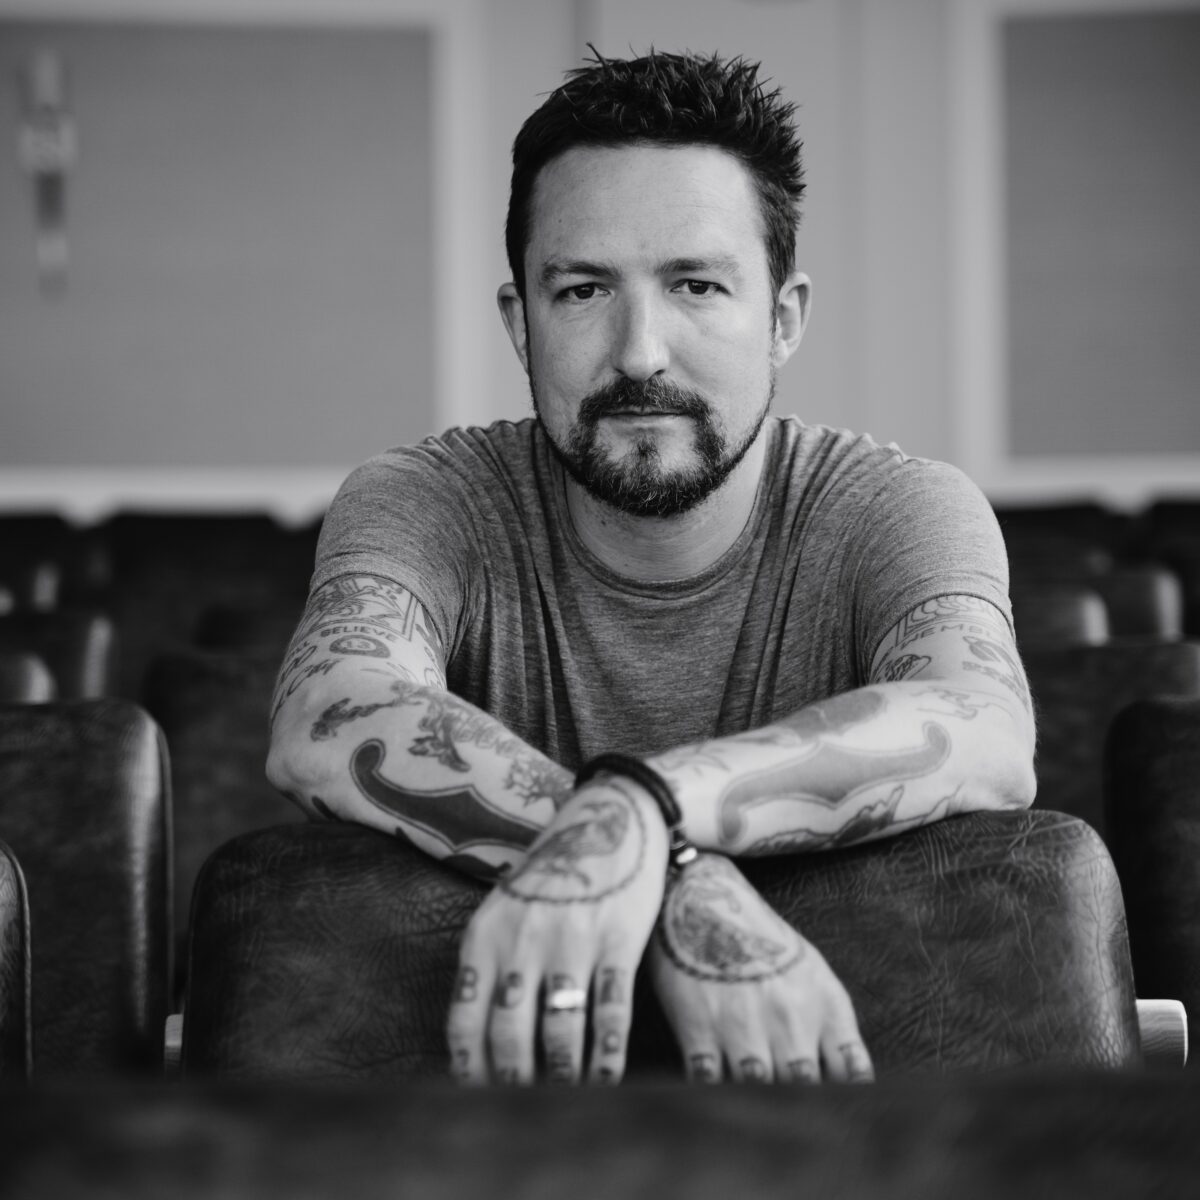 Time for some loud. Live at 9pm for the first show of the week - 9pm - 11pm on @Cambridge105 with guests @frankturner and @MrAndyCopping from @DownloadFest Available on FM. Digital. Online. Speaker. Radioplayer.